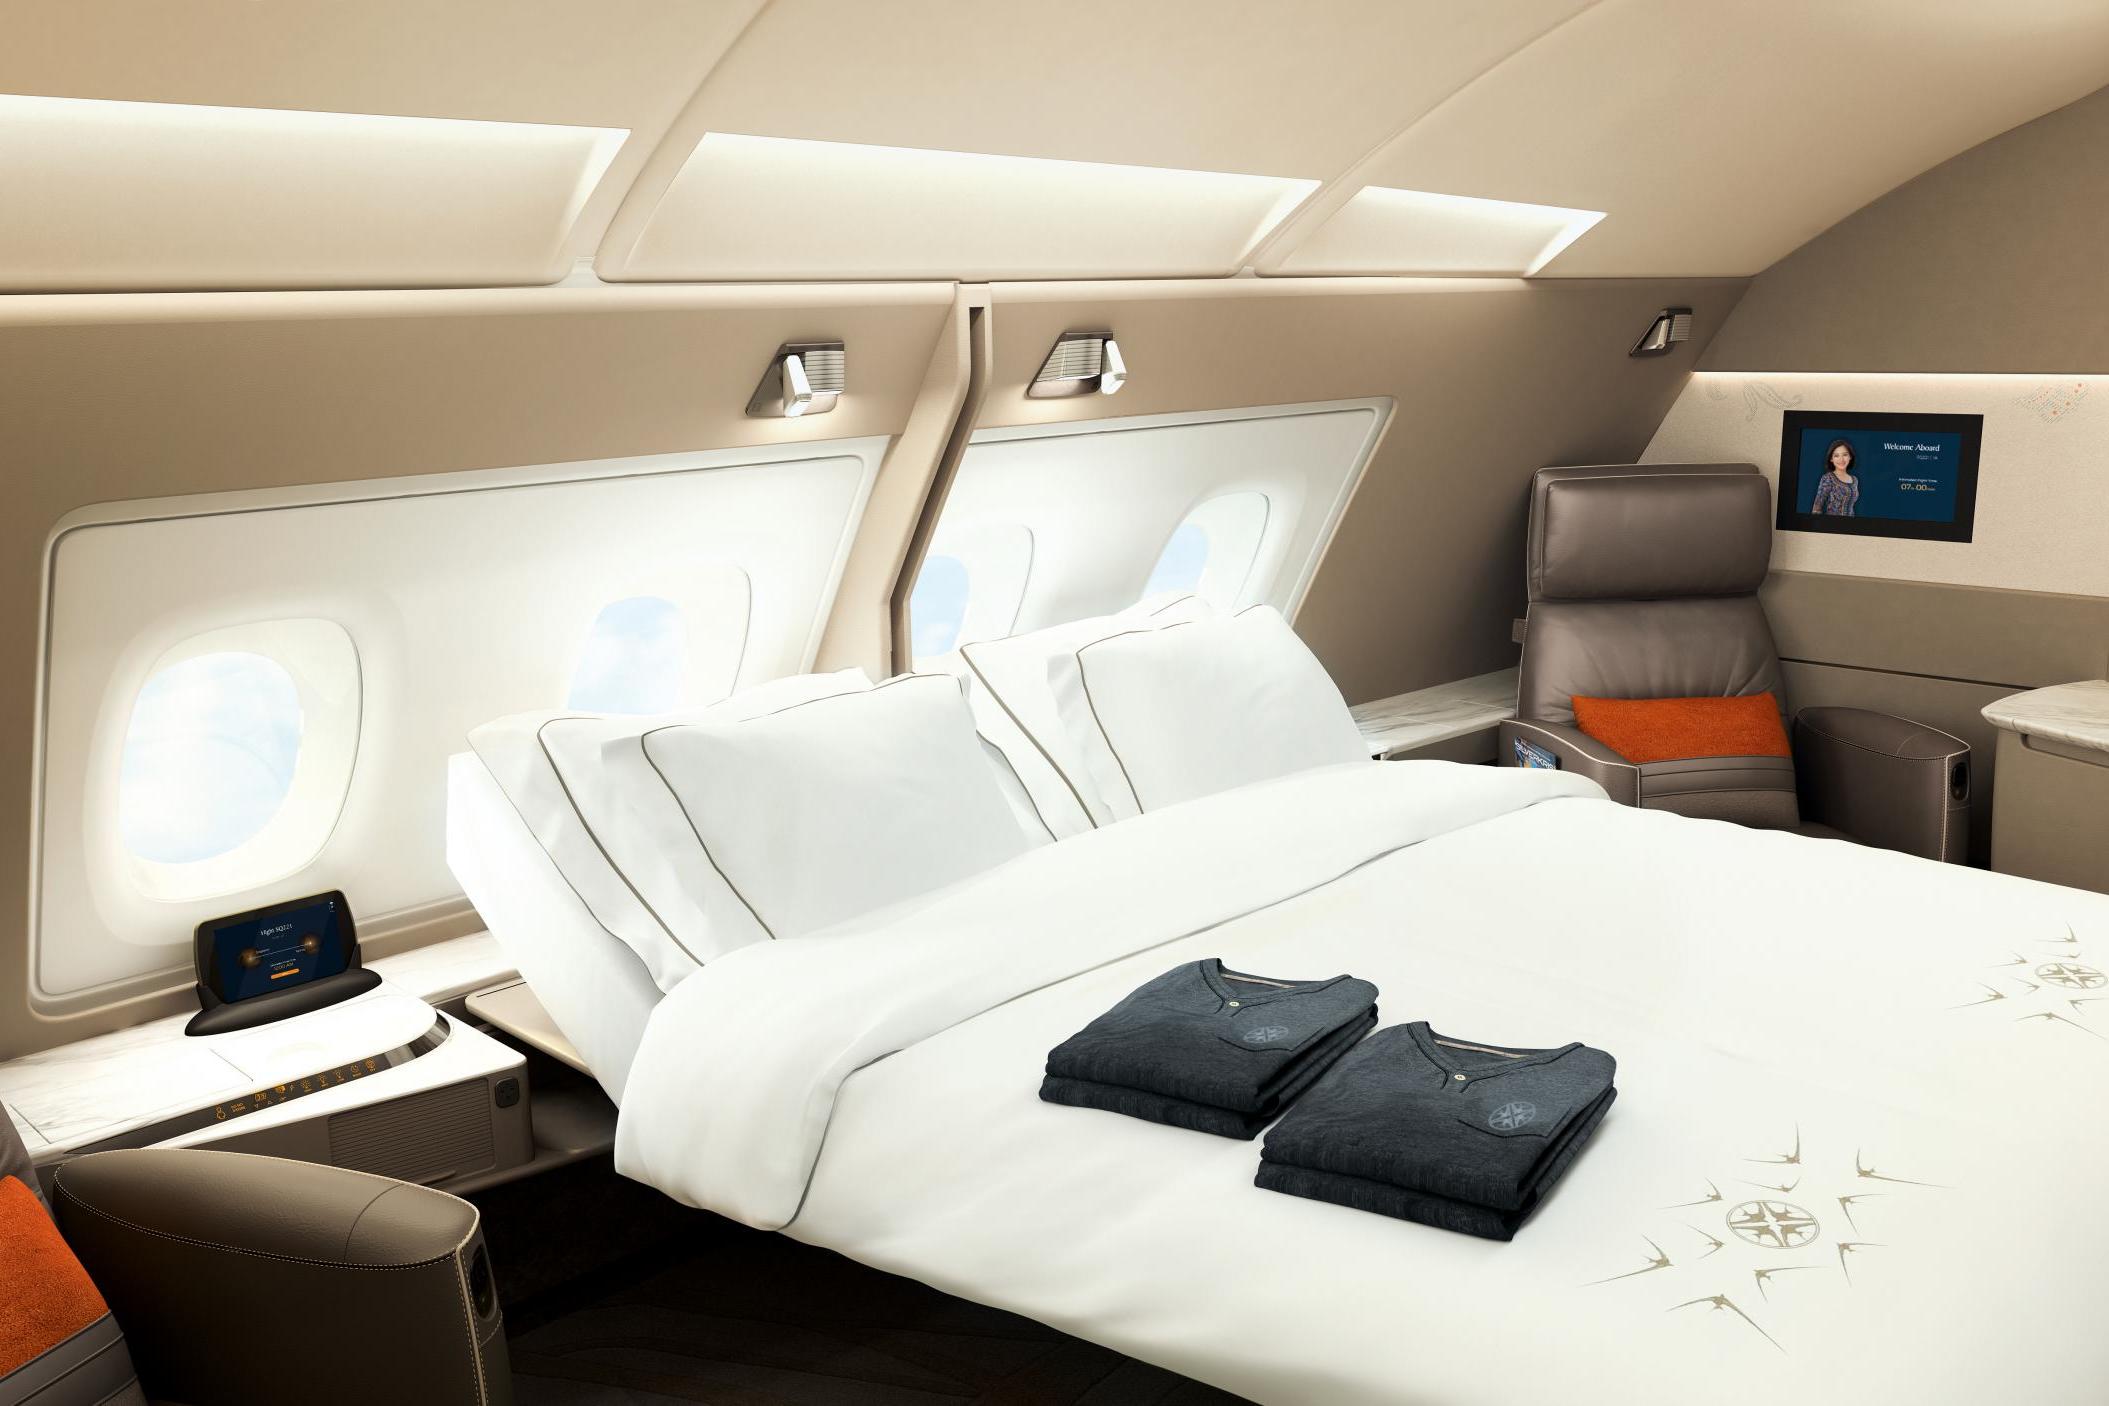 Interior options for private jets | PrivateFly Blog